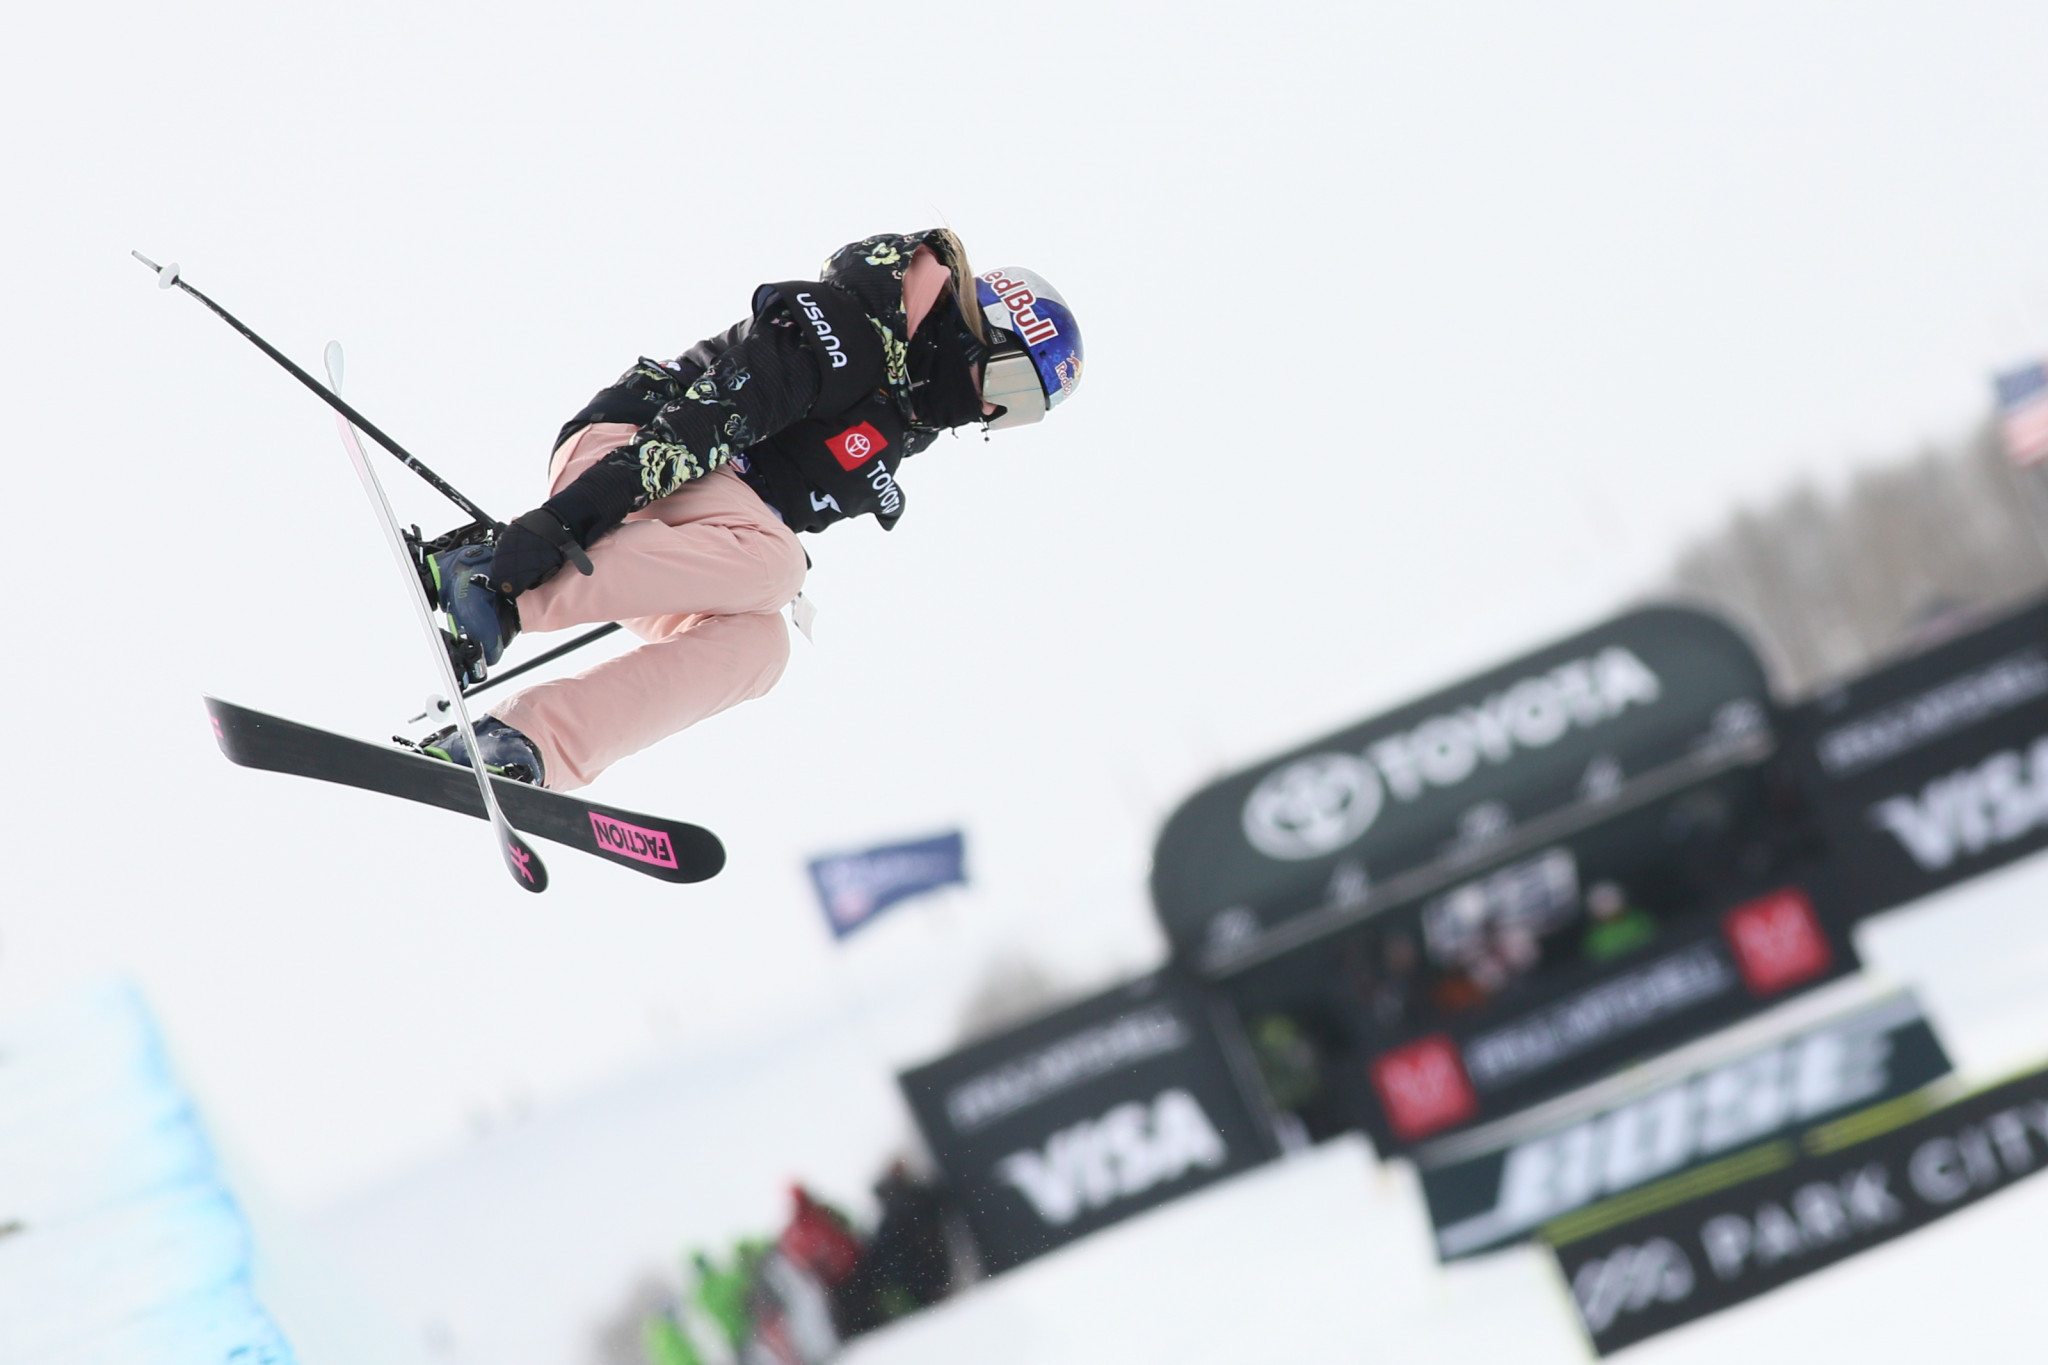 Sildaru triumphs in women's freestyle big air at FIS World Junior Freestyle Skiing Championships